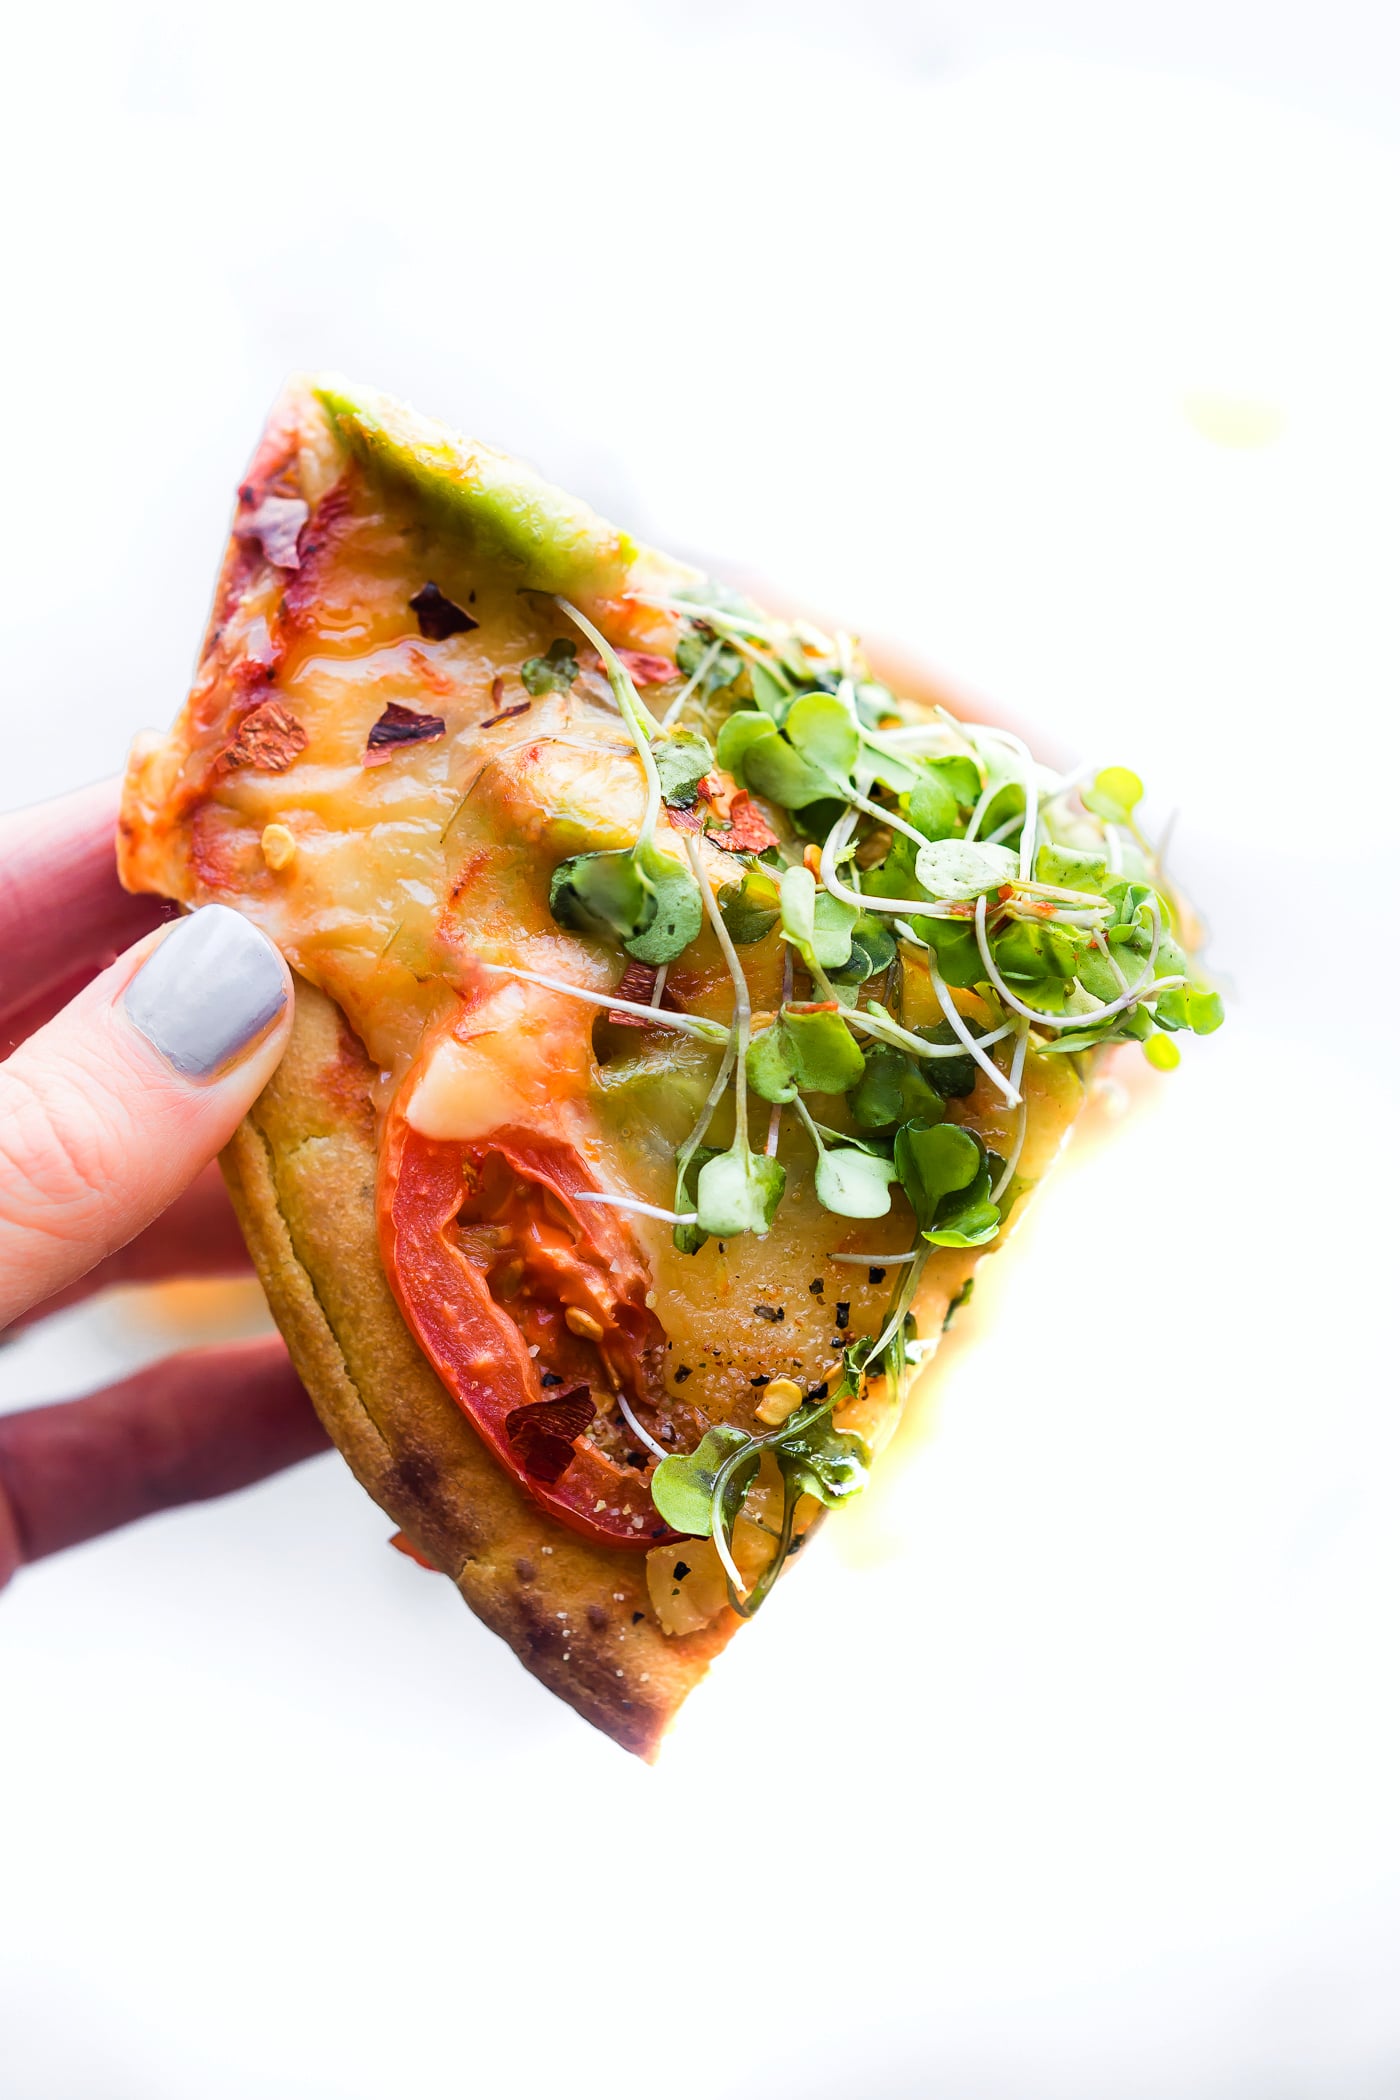 Avocado Tomato Gouda Socca Pizza recipe to love! A grain free, gluten free Avocado Tomato Gouda Socca Pizza made with chickpea flour and topped with Avocado, Gouda, Tomato, and Sprouted Greens! Seriously easy to make, egg free, vegan option, OMG delicious!